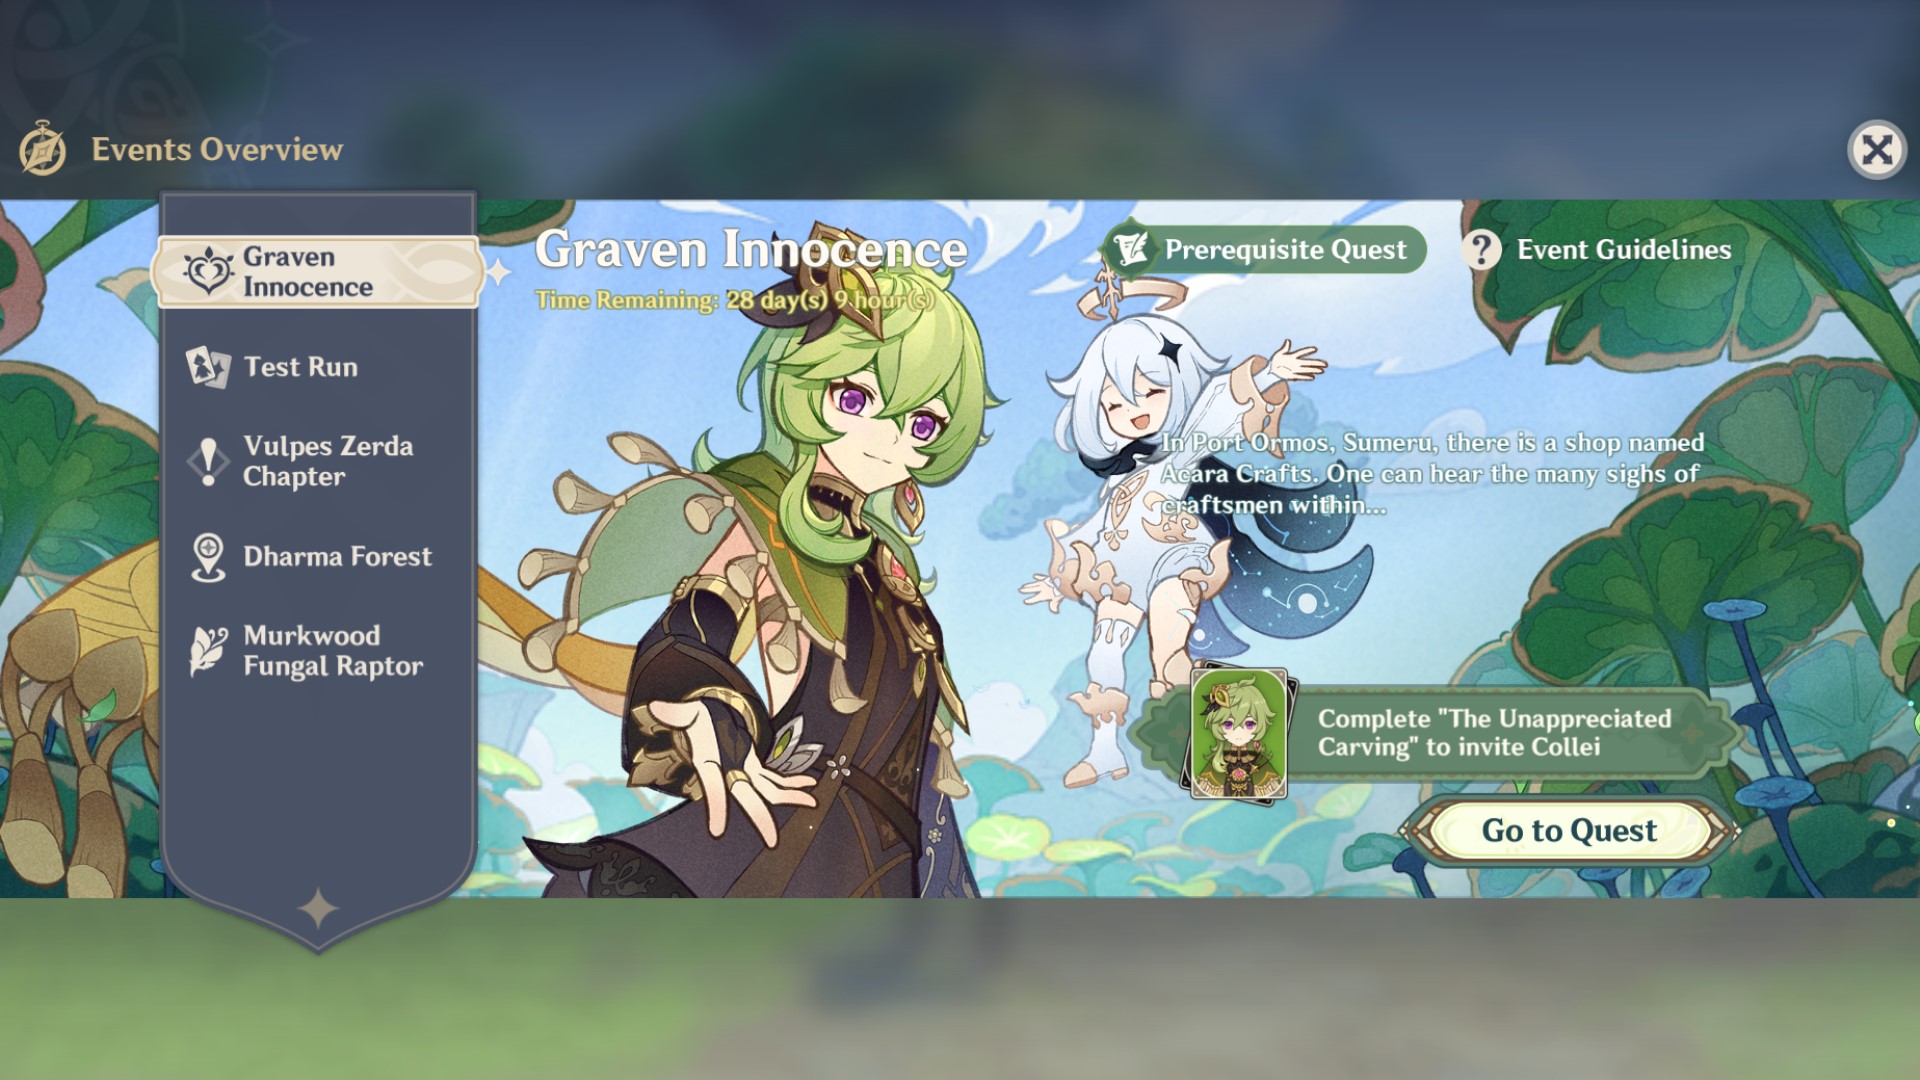 Graven Innocence event that lets you get a free Collei